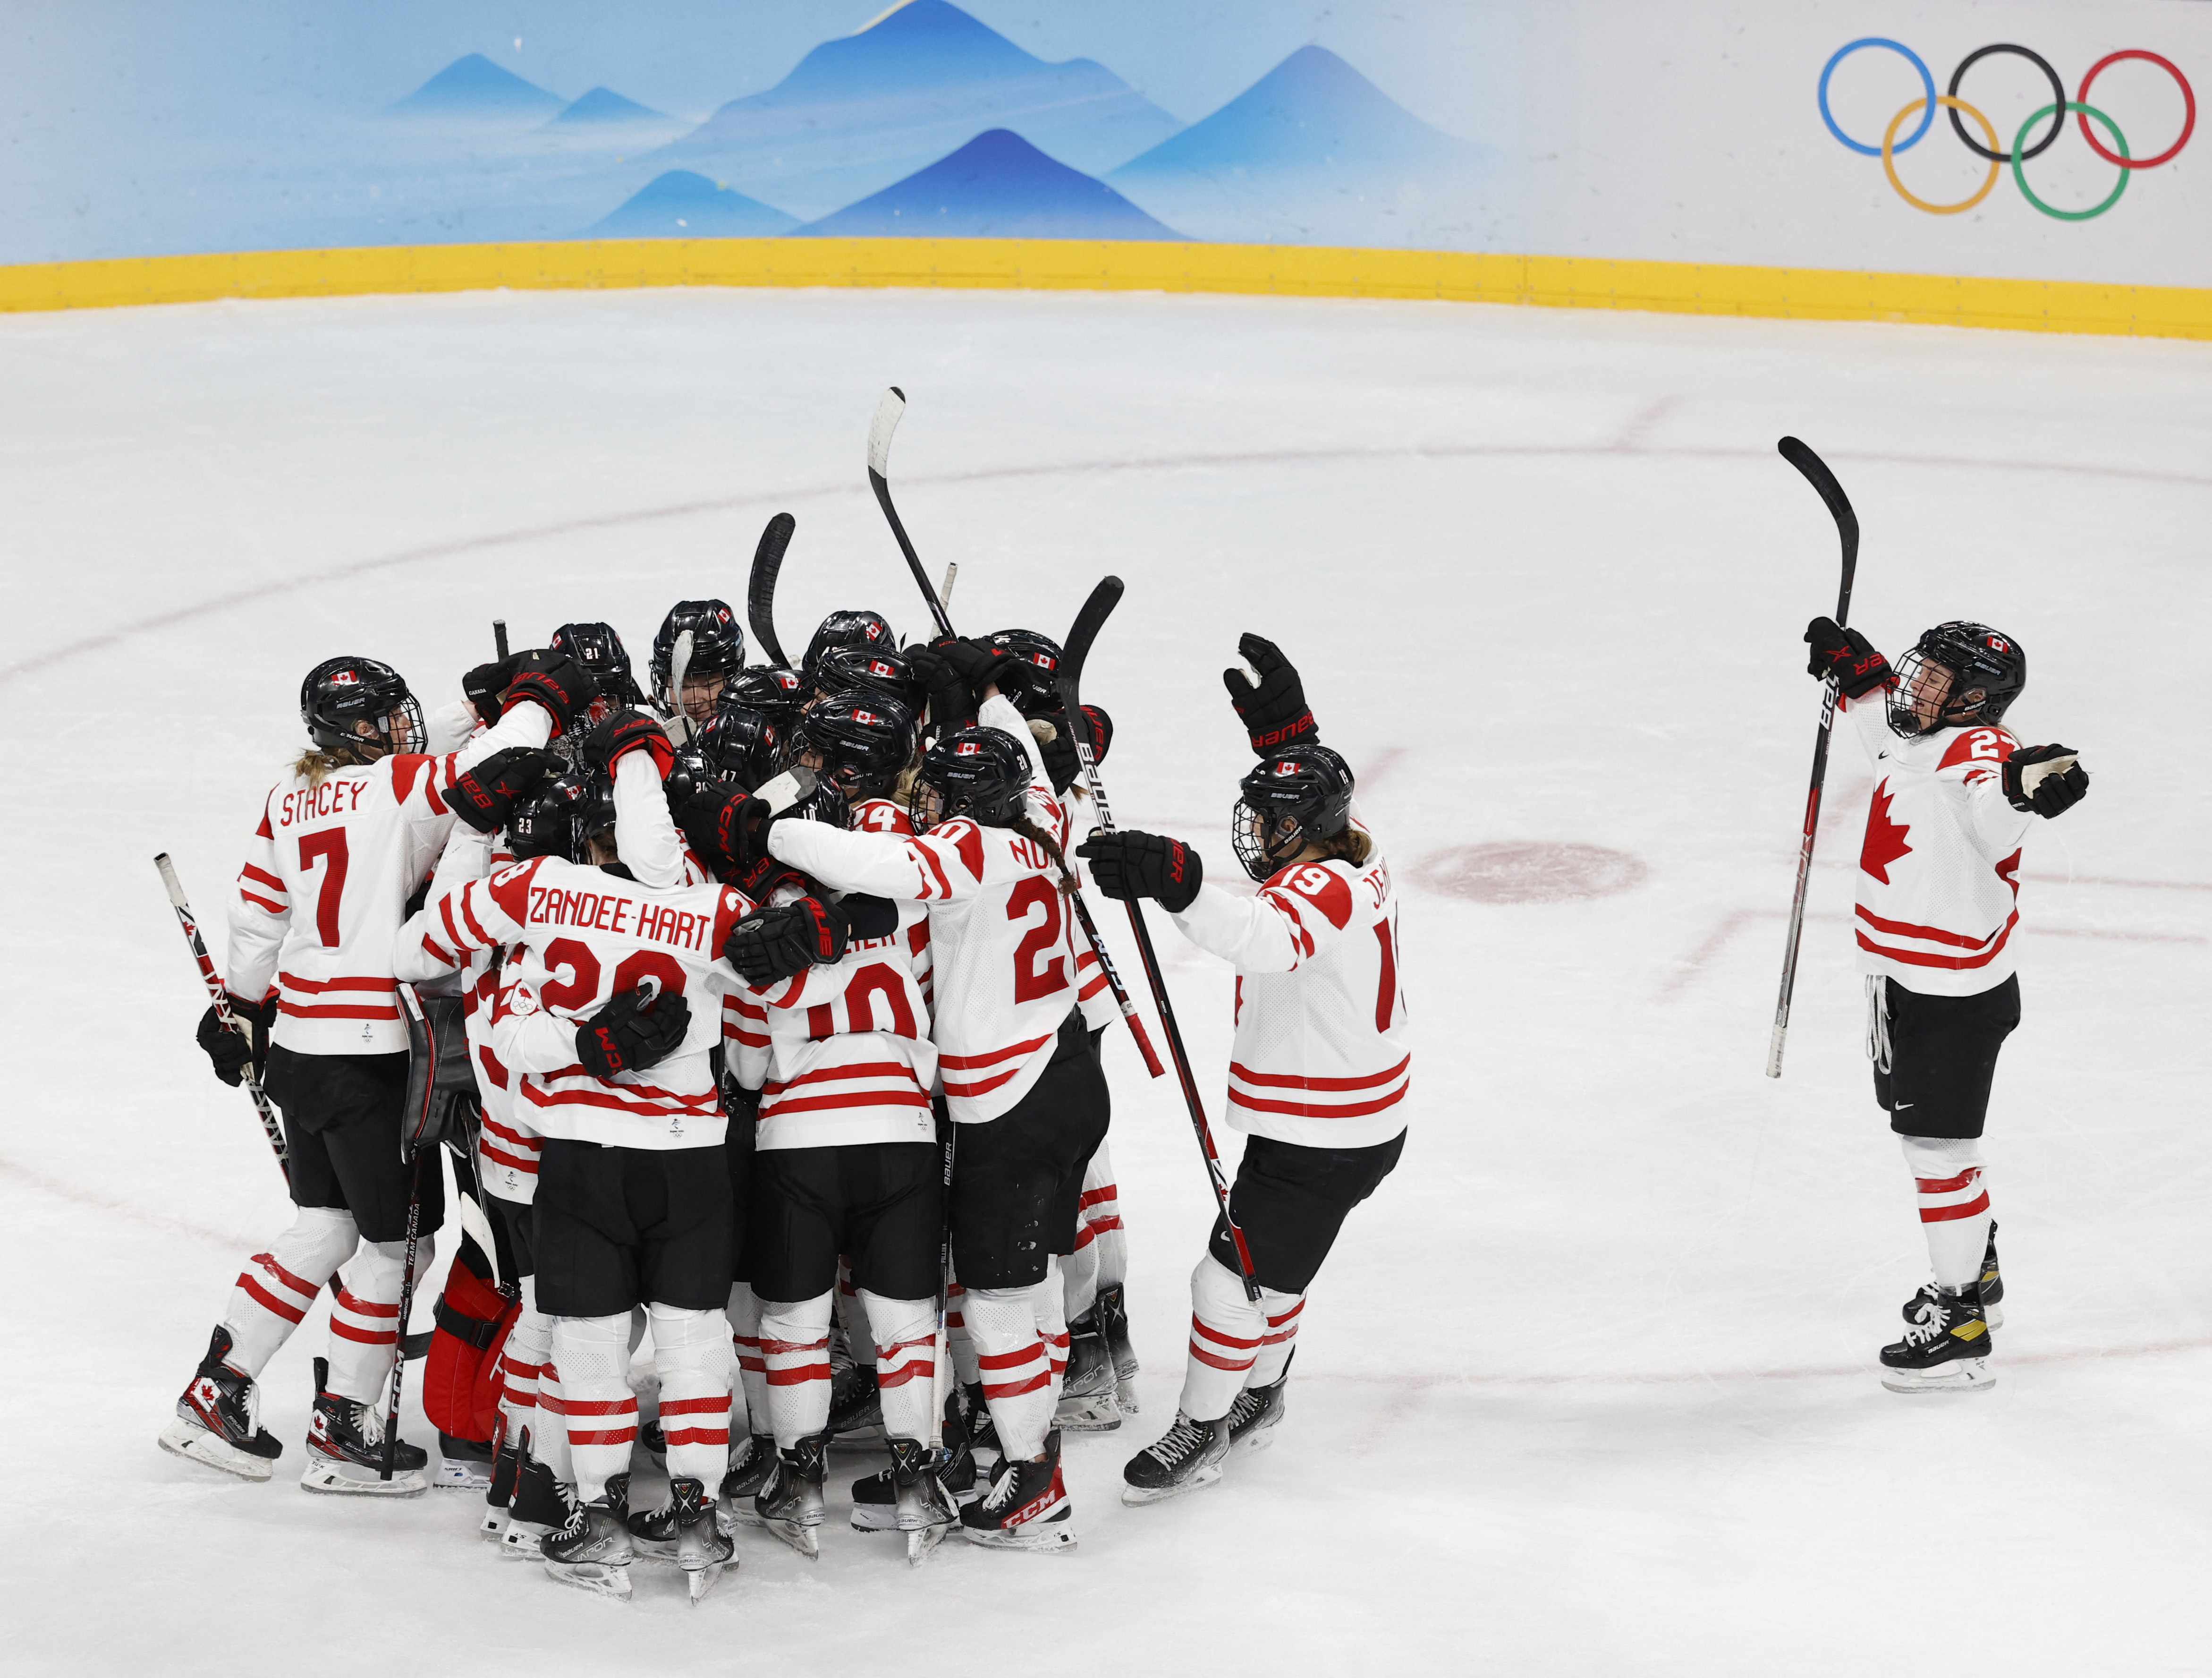 Canada Beats U S 4 2 In Women S Hockey As Goalie Desbiens Sets Canadian Olympic Record For Saves The Globe And Mail